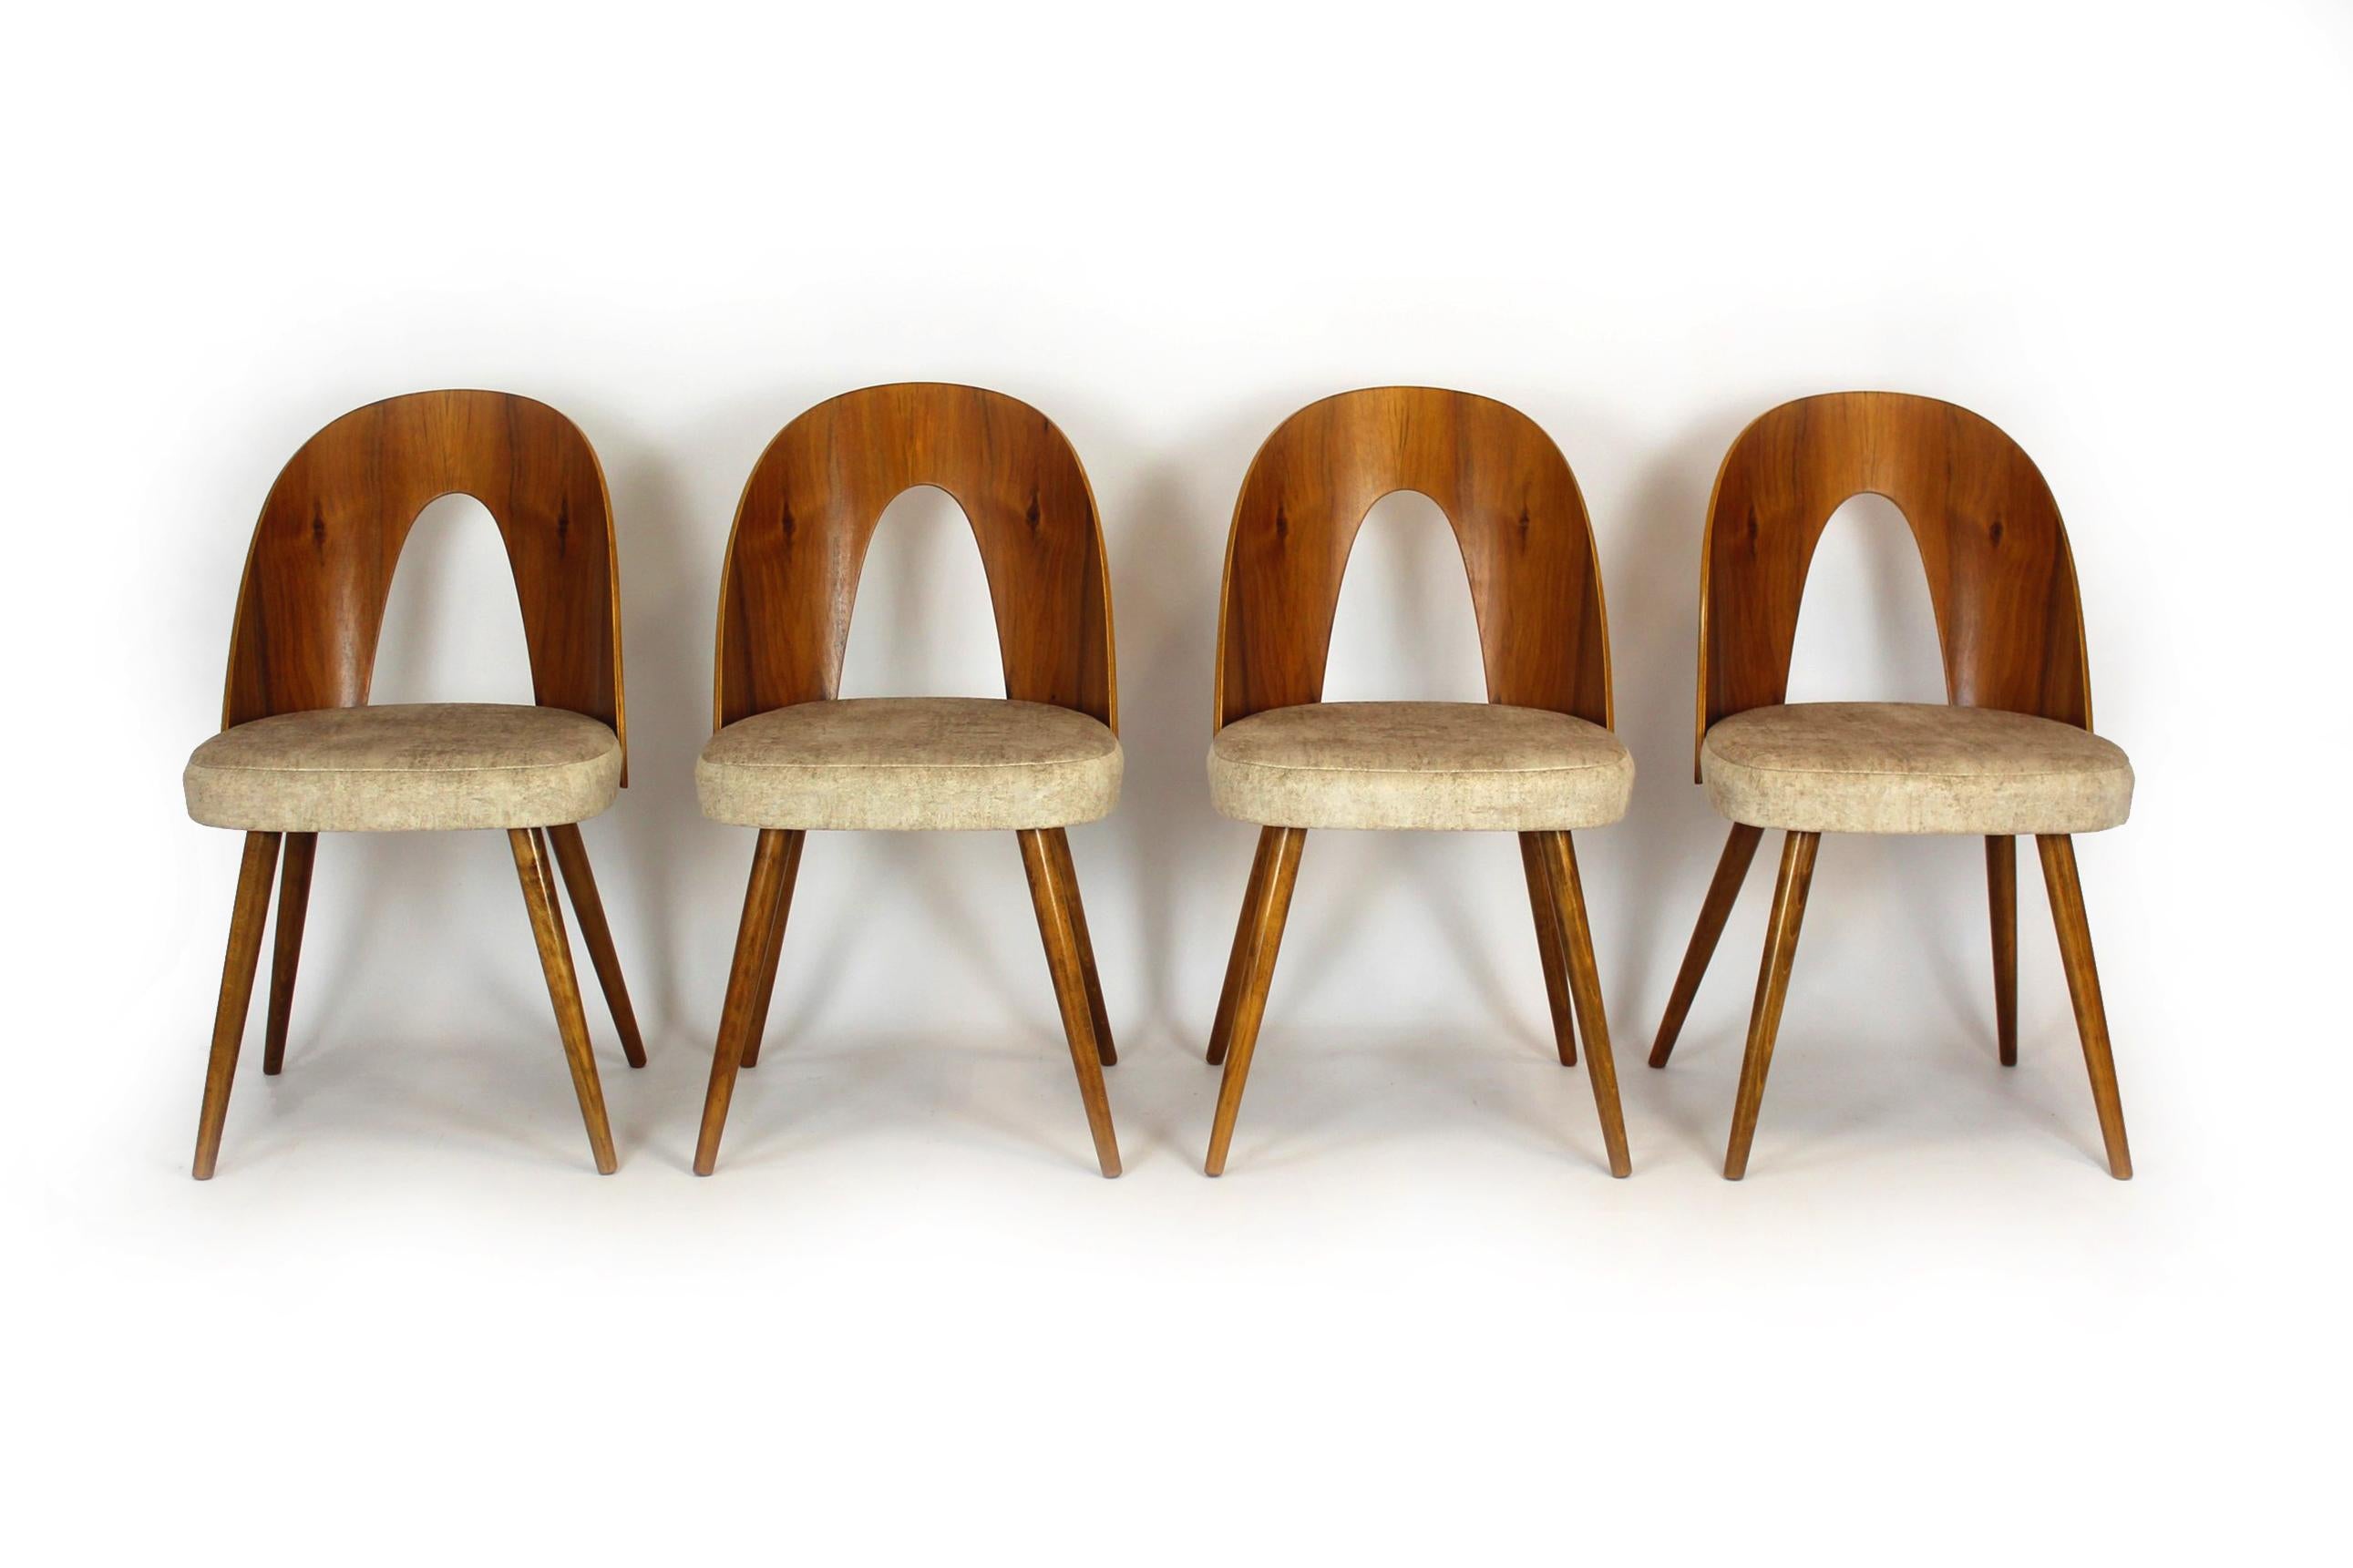 A set of four chairs, designed in the 1960s by Antonin Suman. The chairs are made of beech wood, the backrests are bent plywood with walnut veneer.
The chairs have been restored - have new seat foam upholstered with a fabric with increased